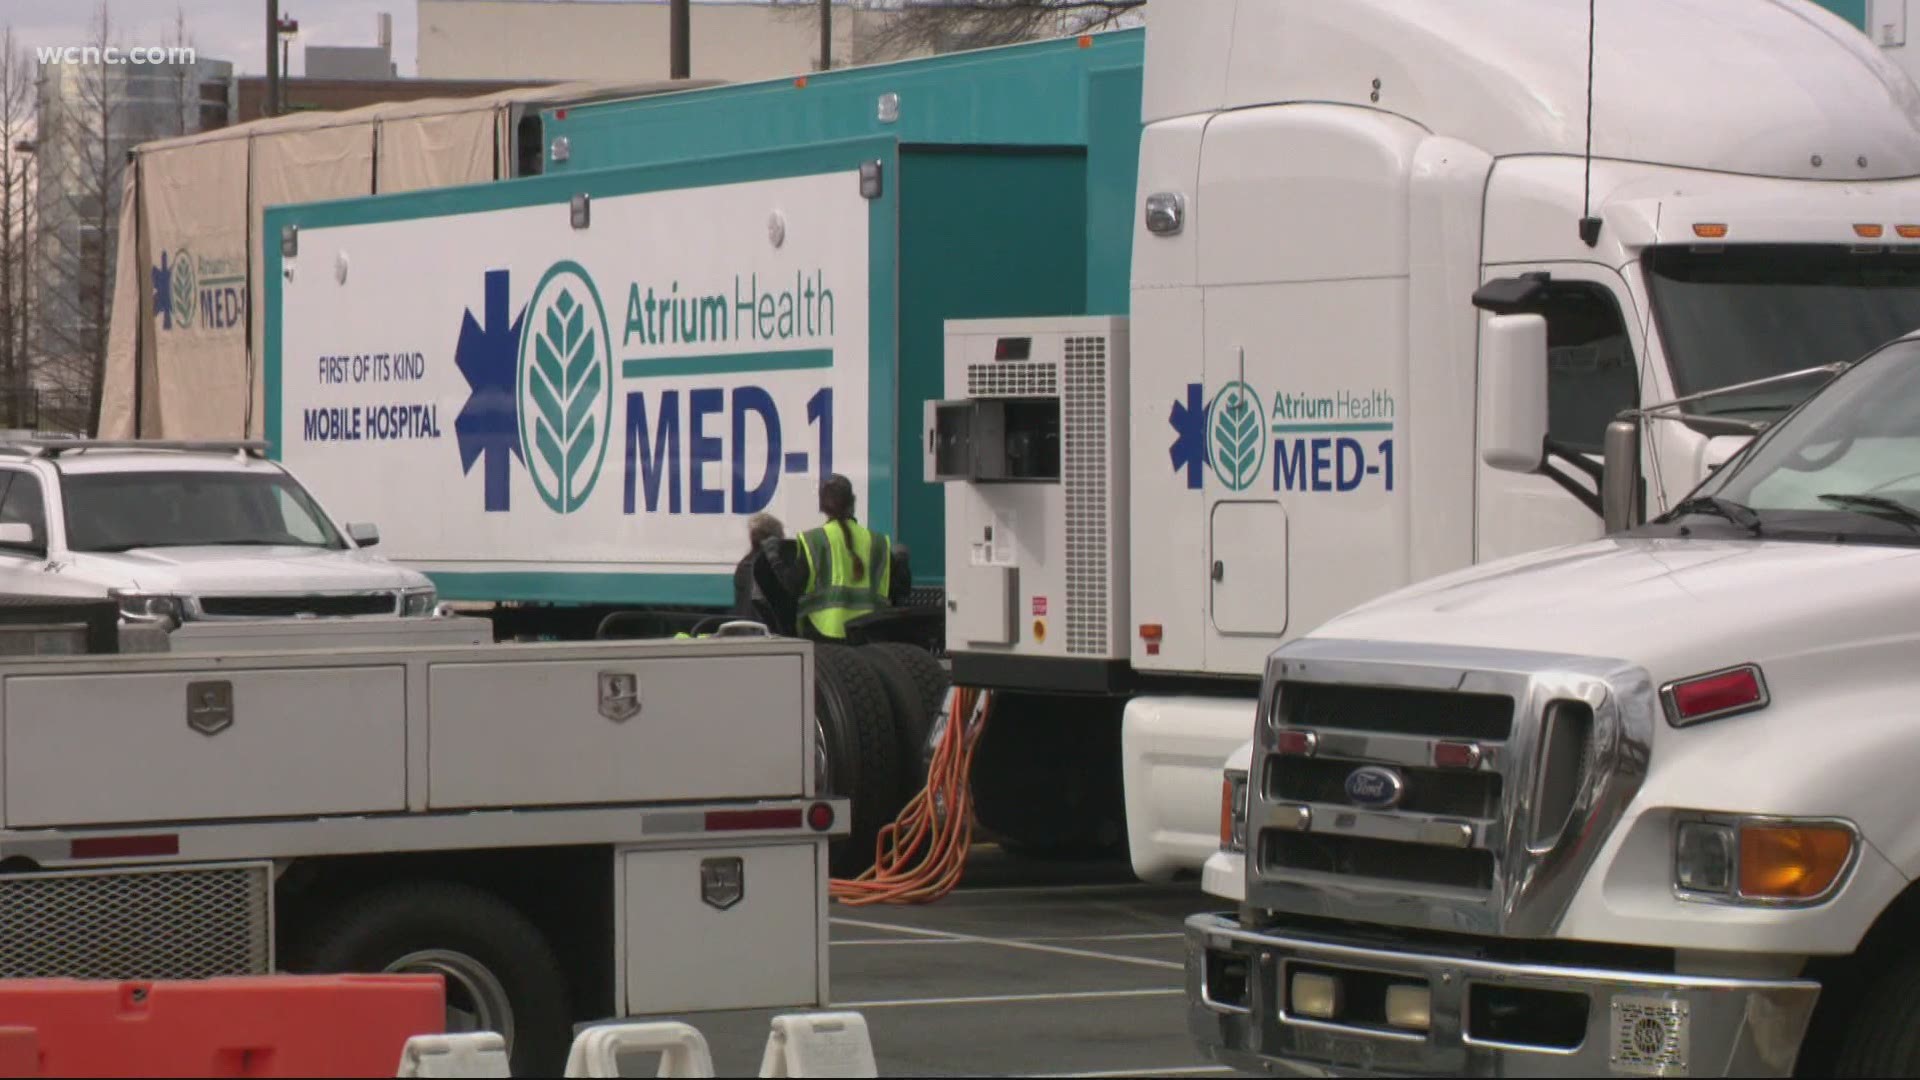 The health system said the emergency mobile hospital will be used to help treat less critical patients and provide bed space as hospitalizations continue to rise.